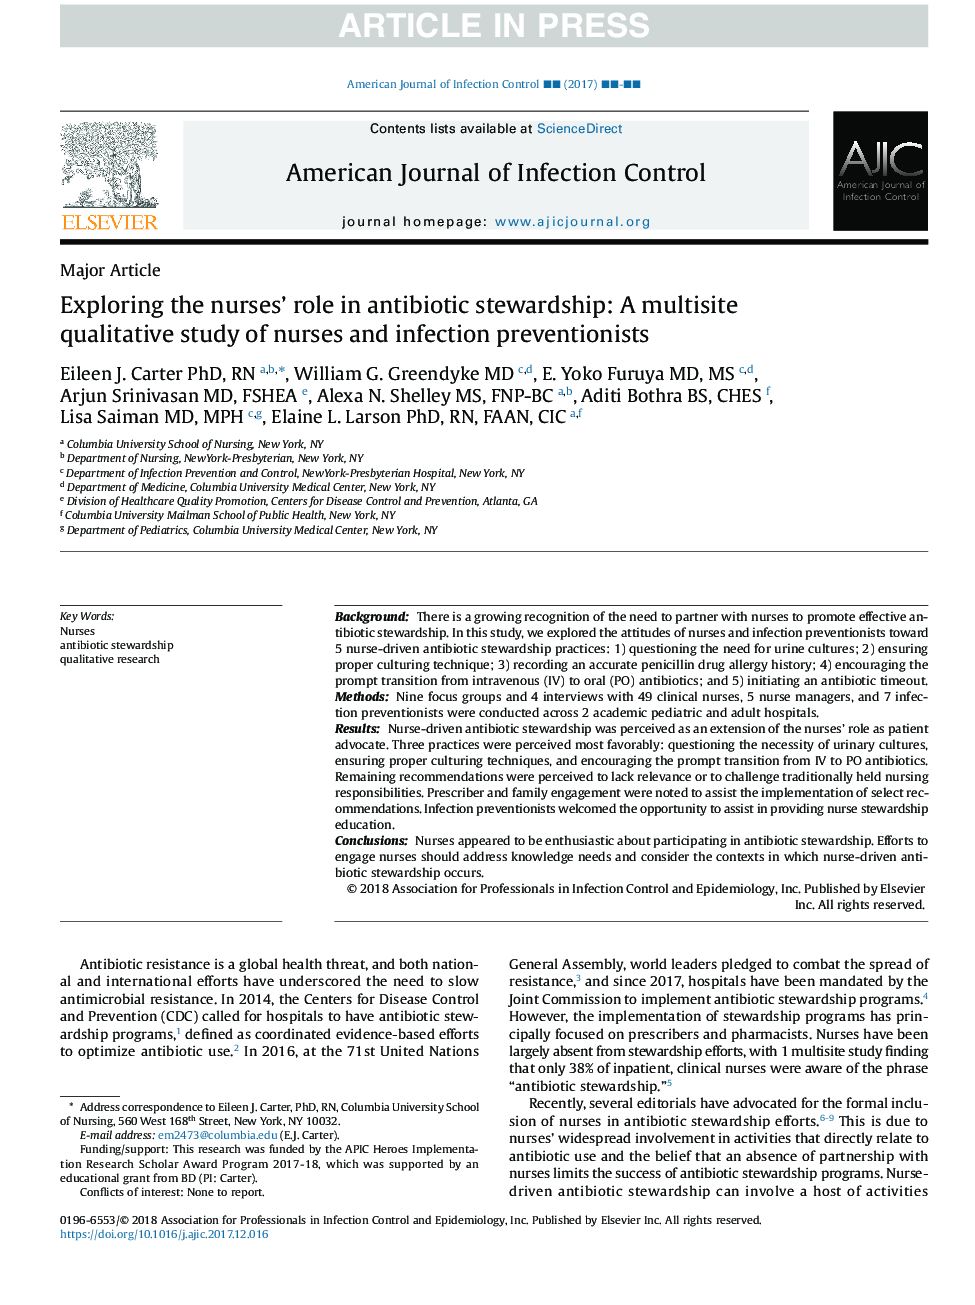 Exploring the nurses' role in antibiotic stewardship: A multisite qualitative study of nurses and infection preventionists